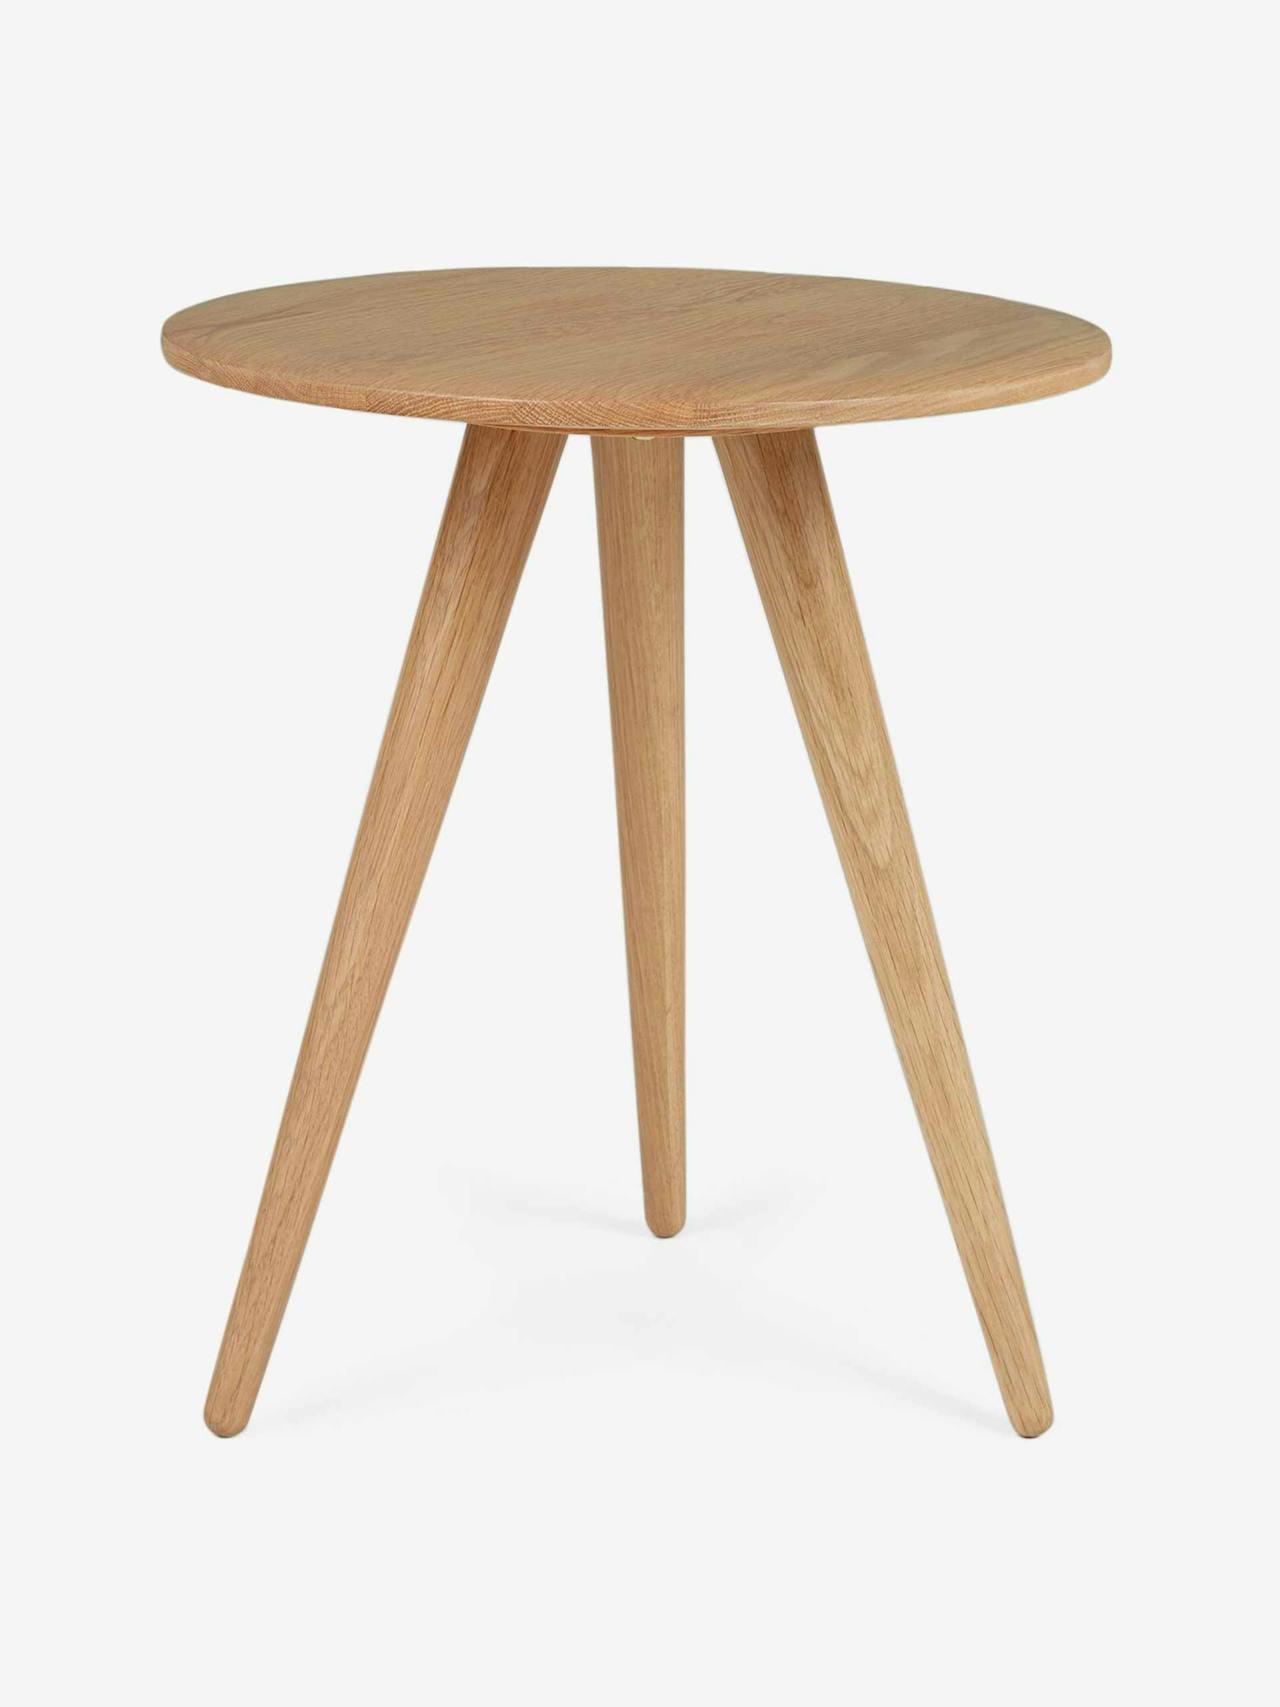 Bray side table